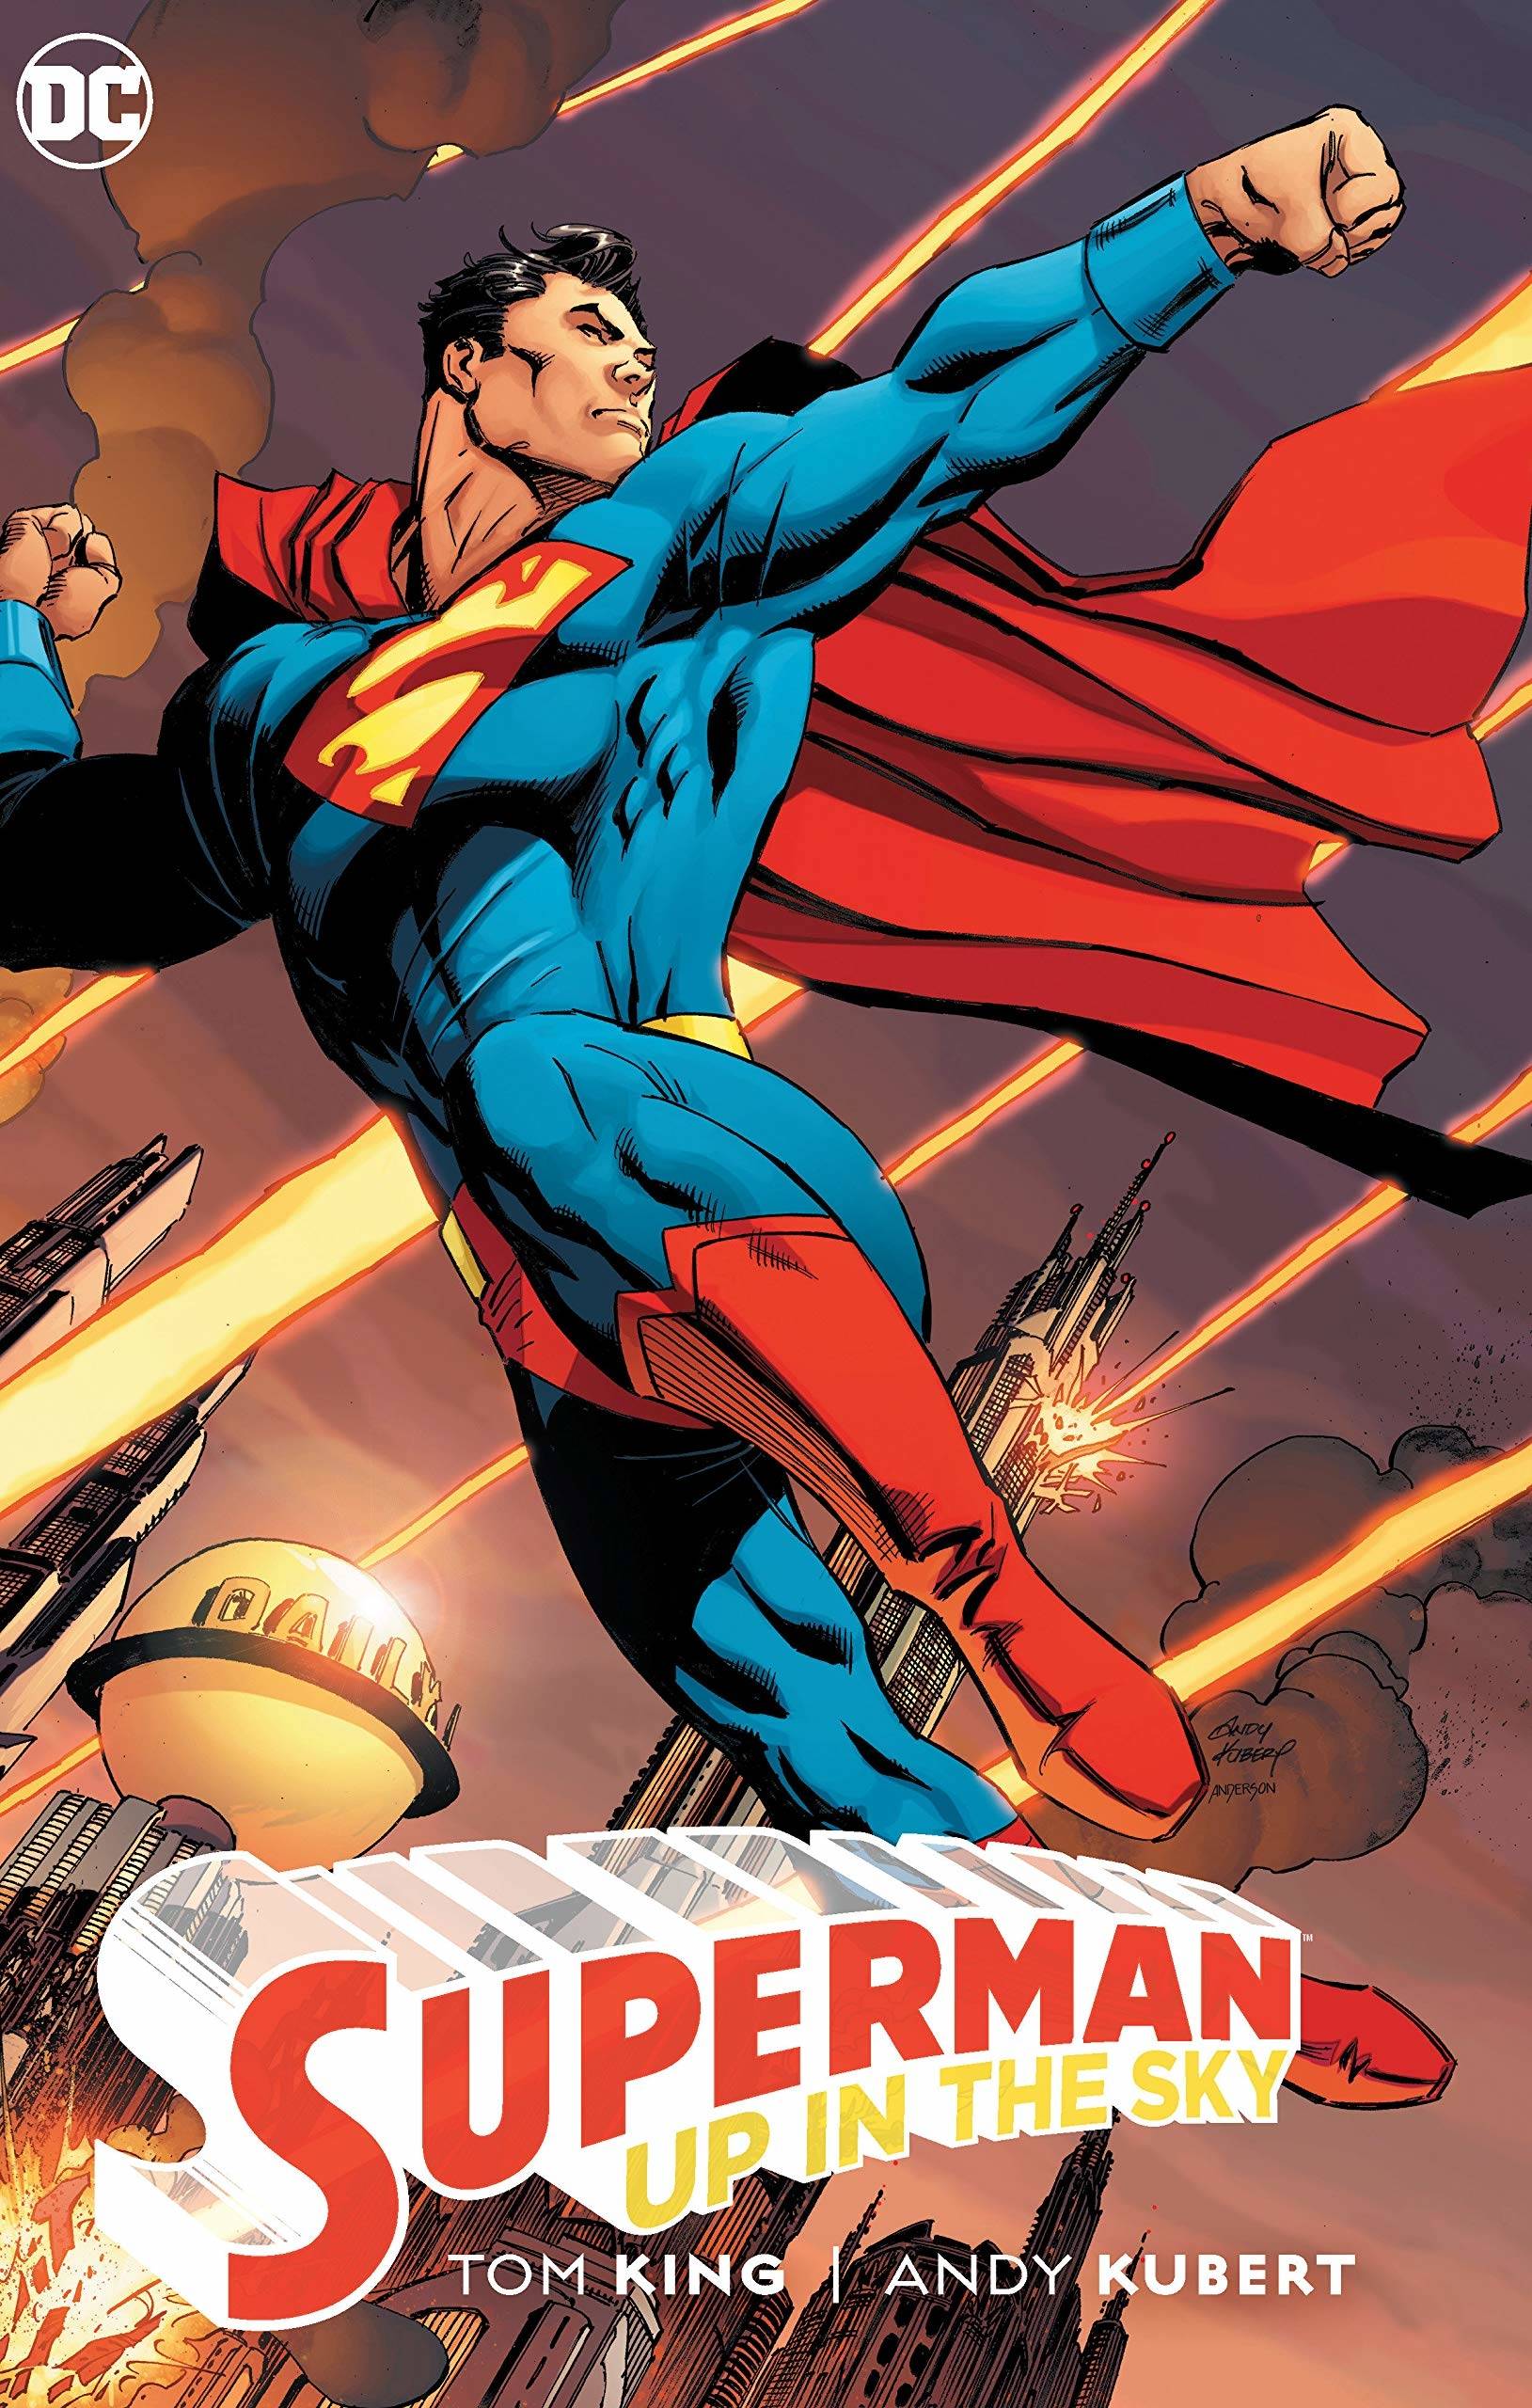 SUPERMAN UP IN SKY TP